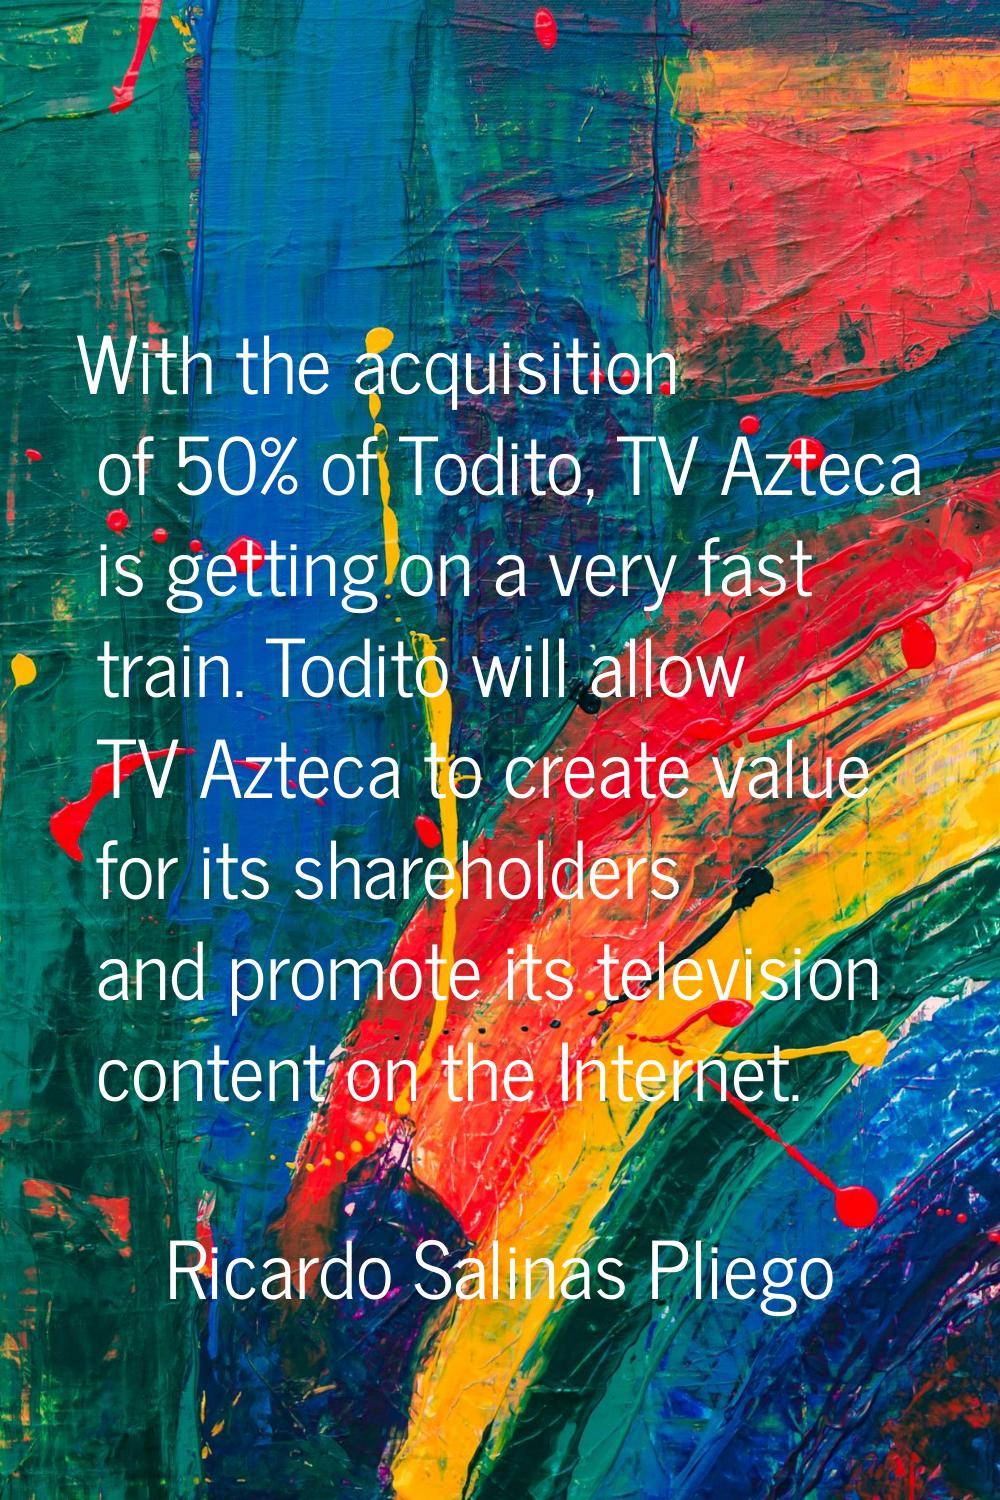 With the acquisition of 50% of Todito, TV Azteca is getting on a very fast train. Todito will allow